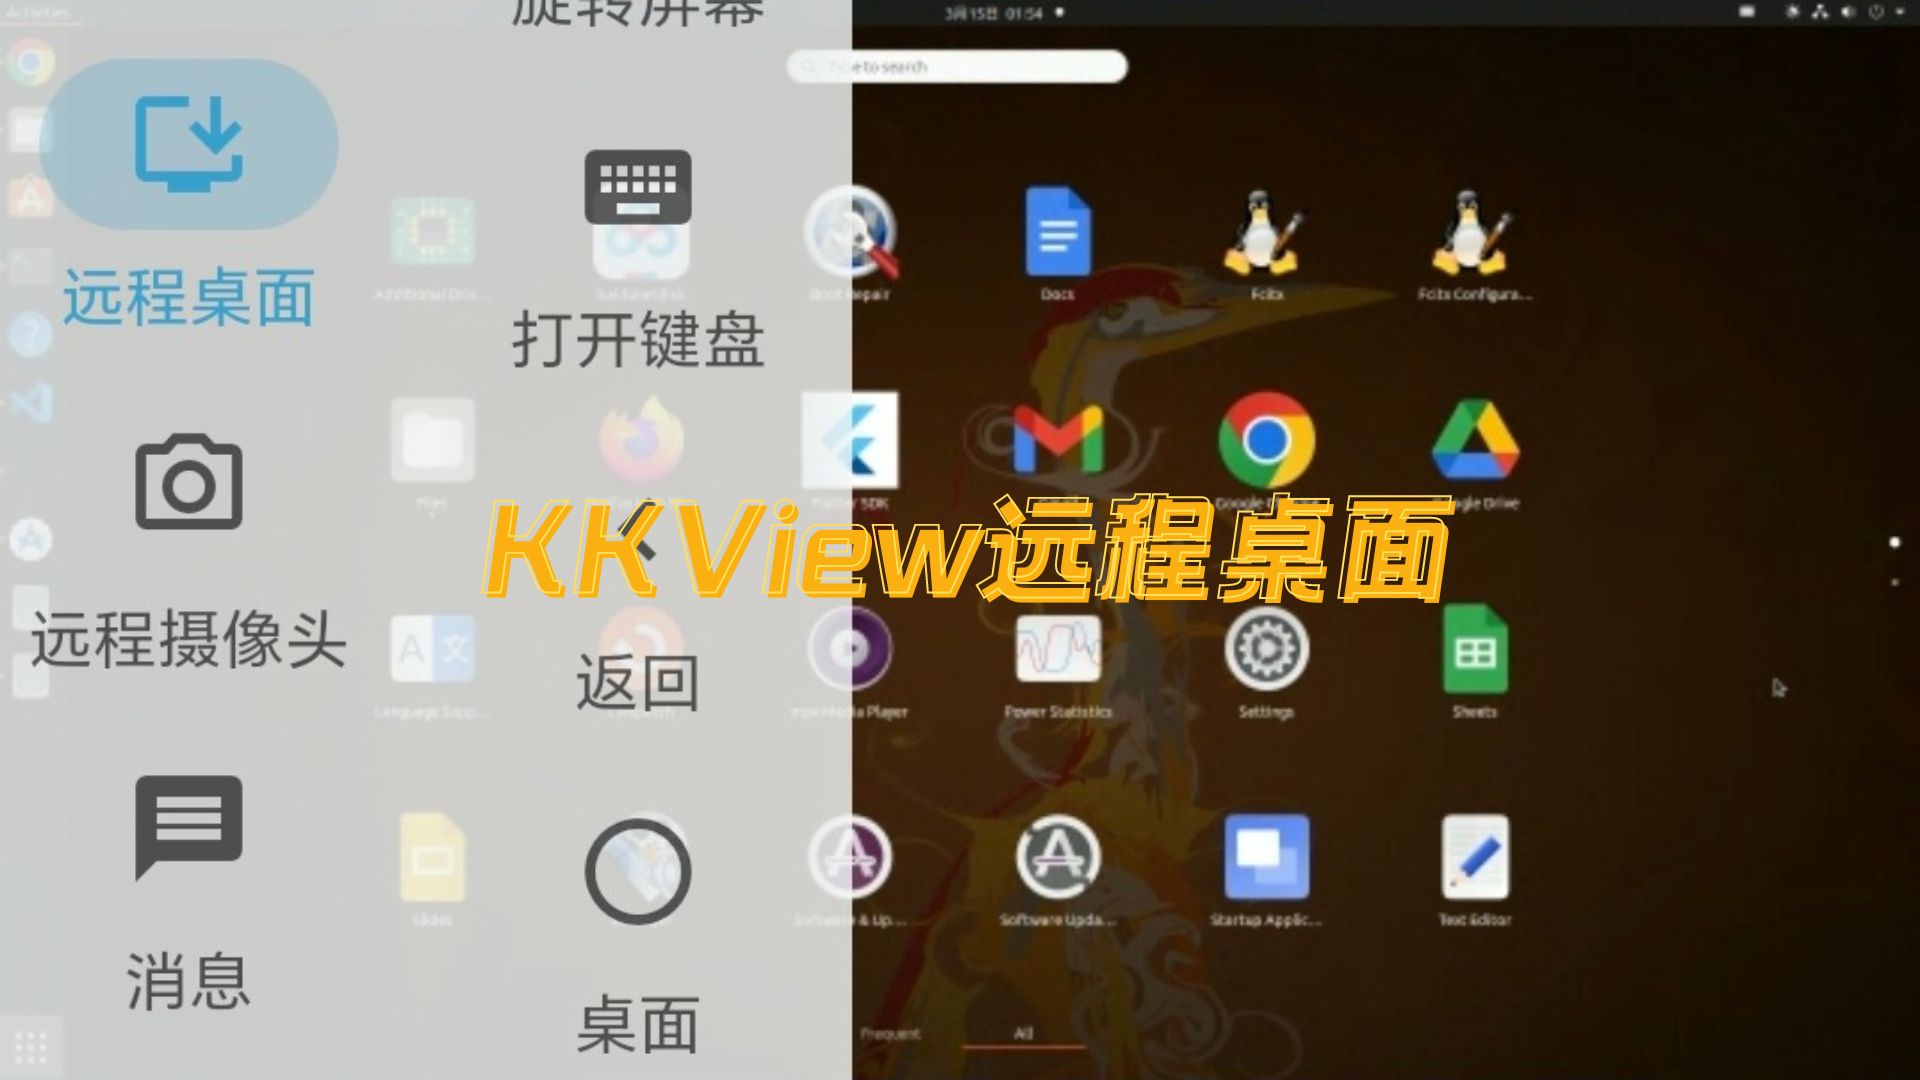 KKVIEW远程<span style='color:red;'>控制</span> <span style='color:red;'>手机</span>远程<span style='color:red;'>控制</span>电脑